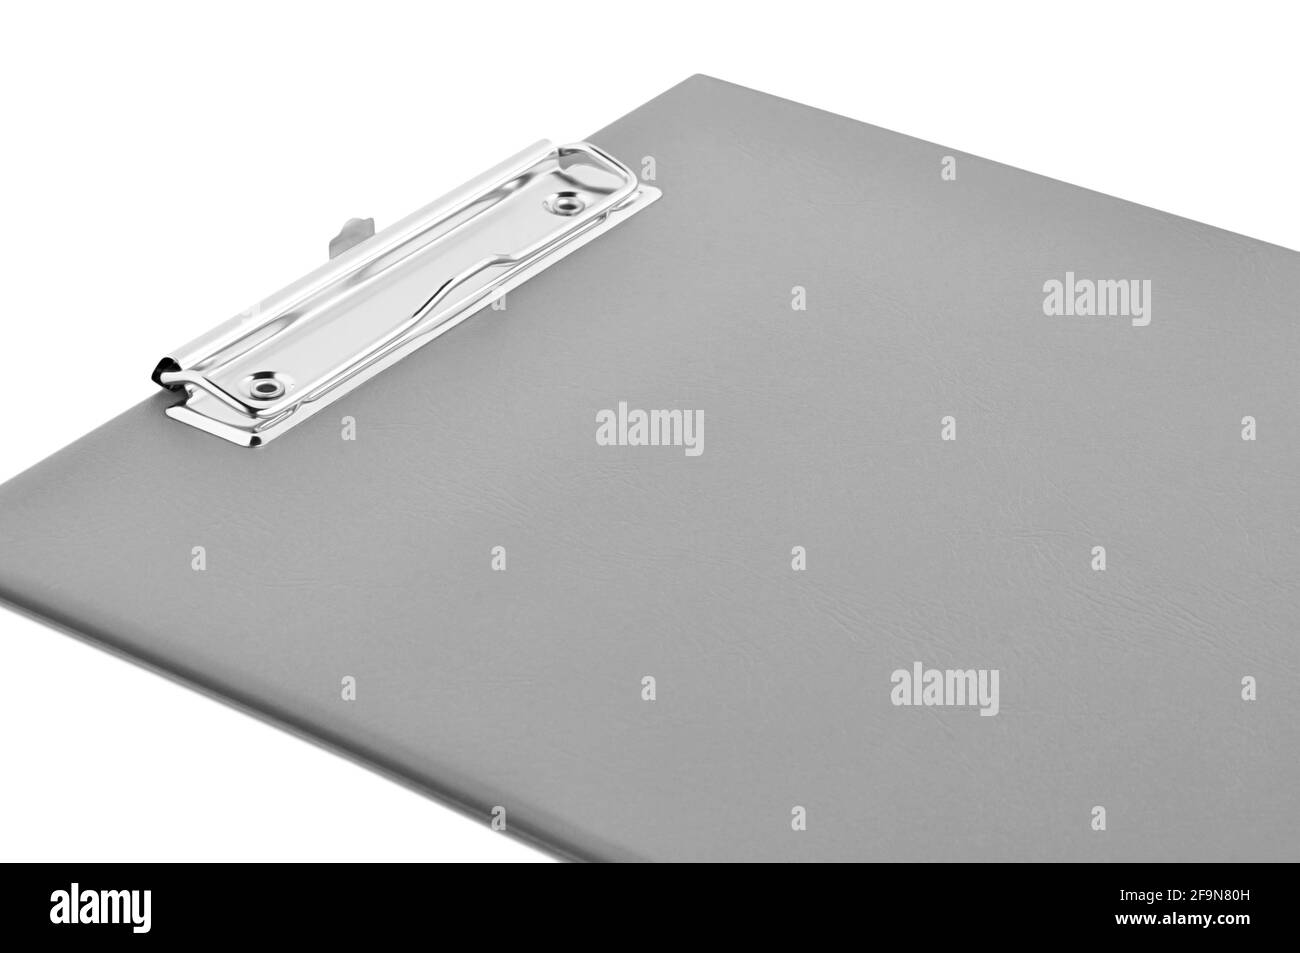 Clipboard - gray plastic clipboard or writing board isolated on white background Stock Photo